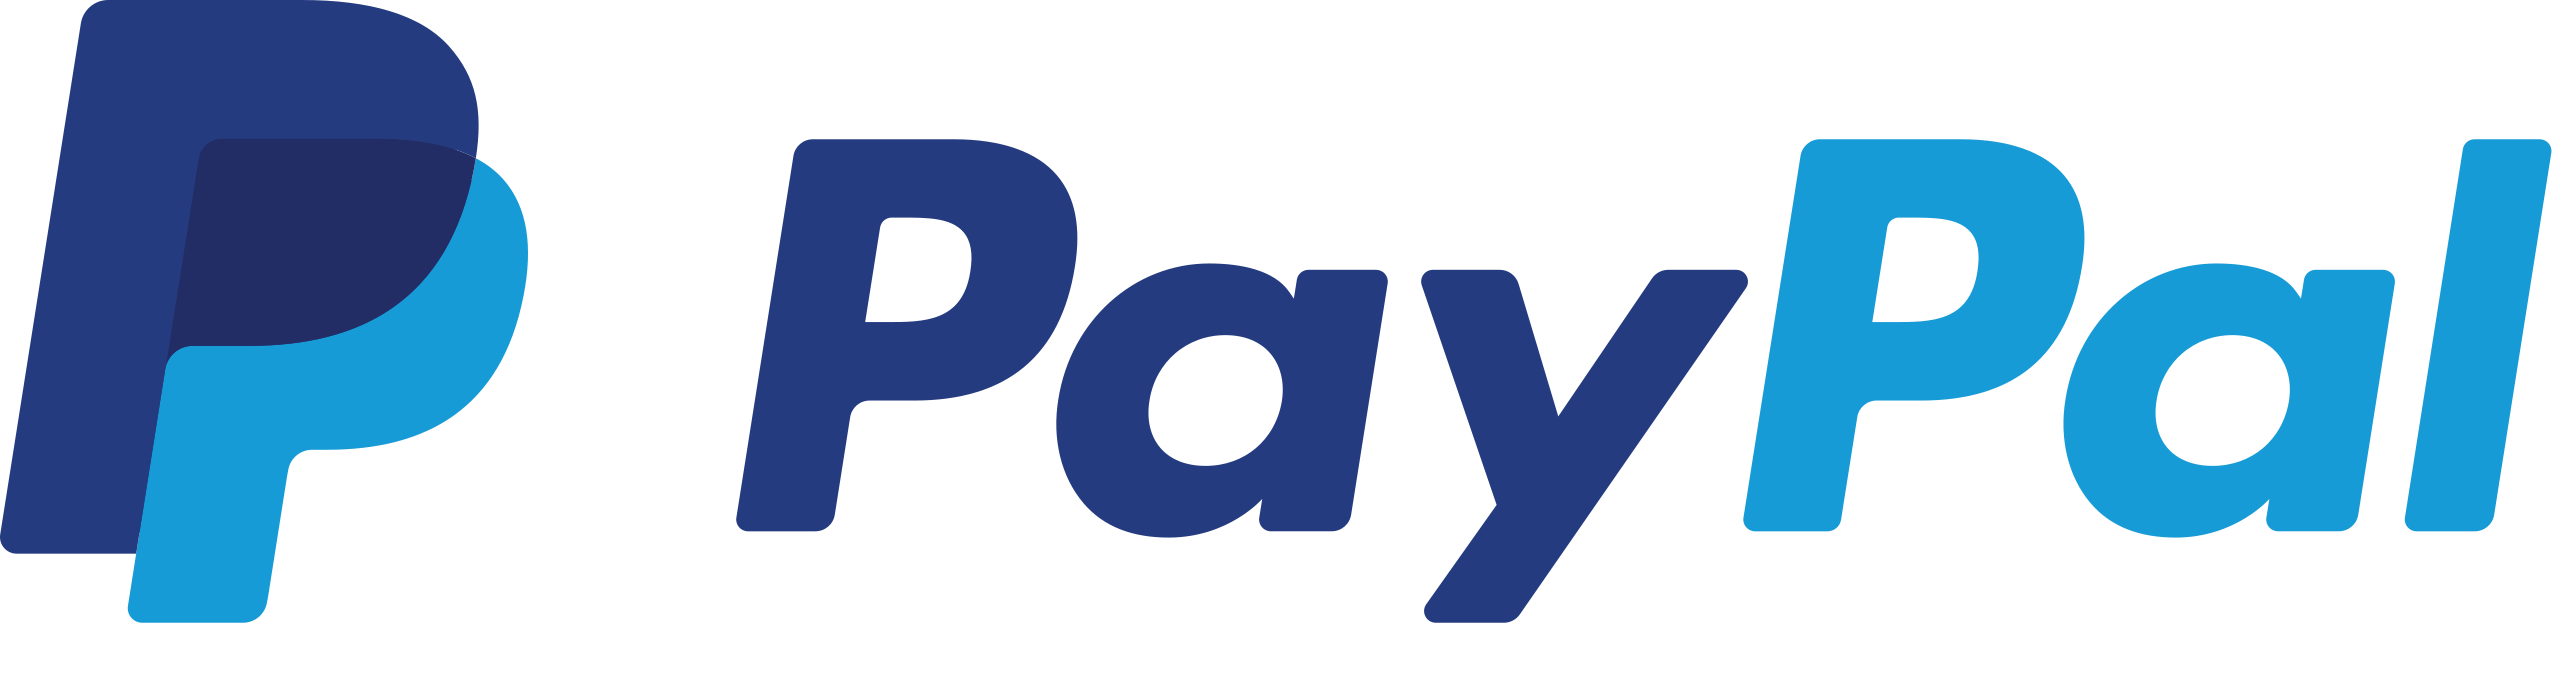 Paypal logo payment